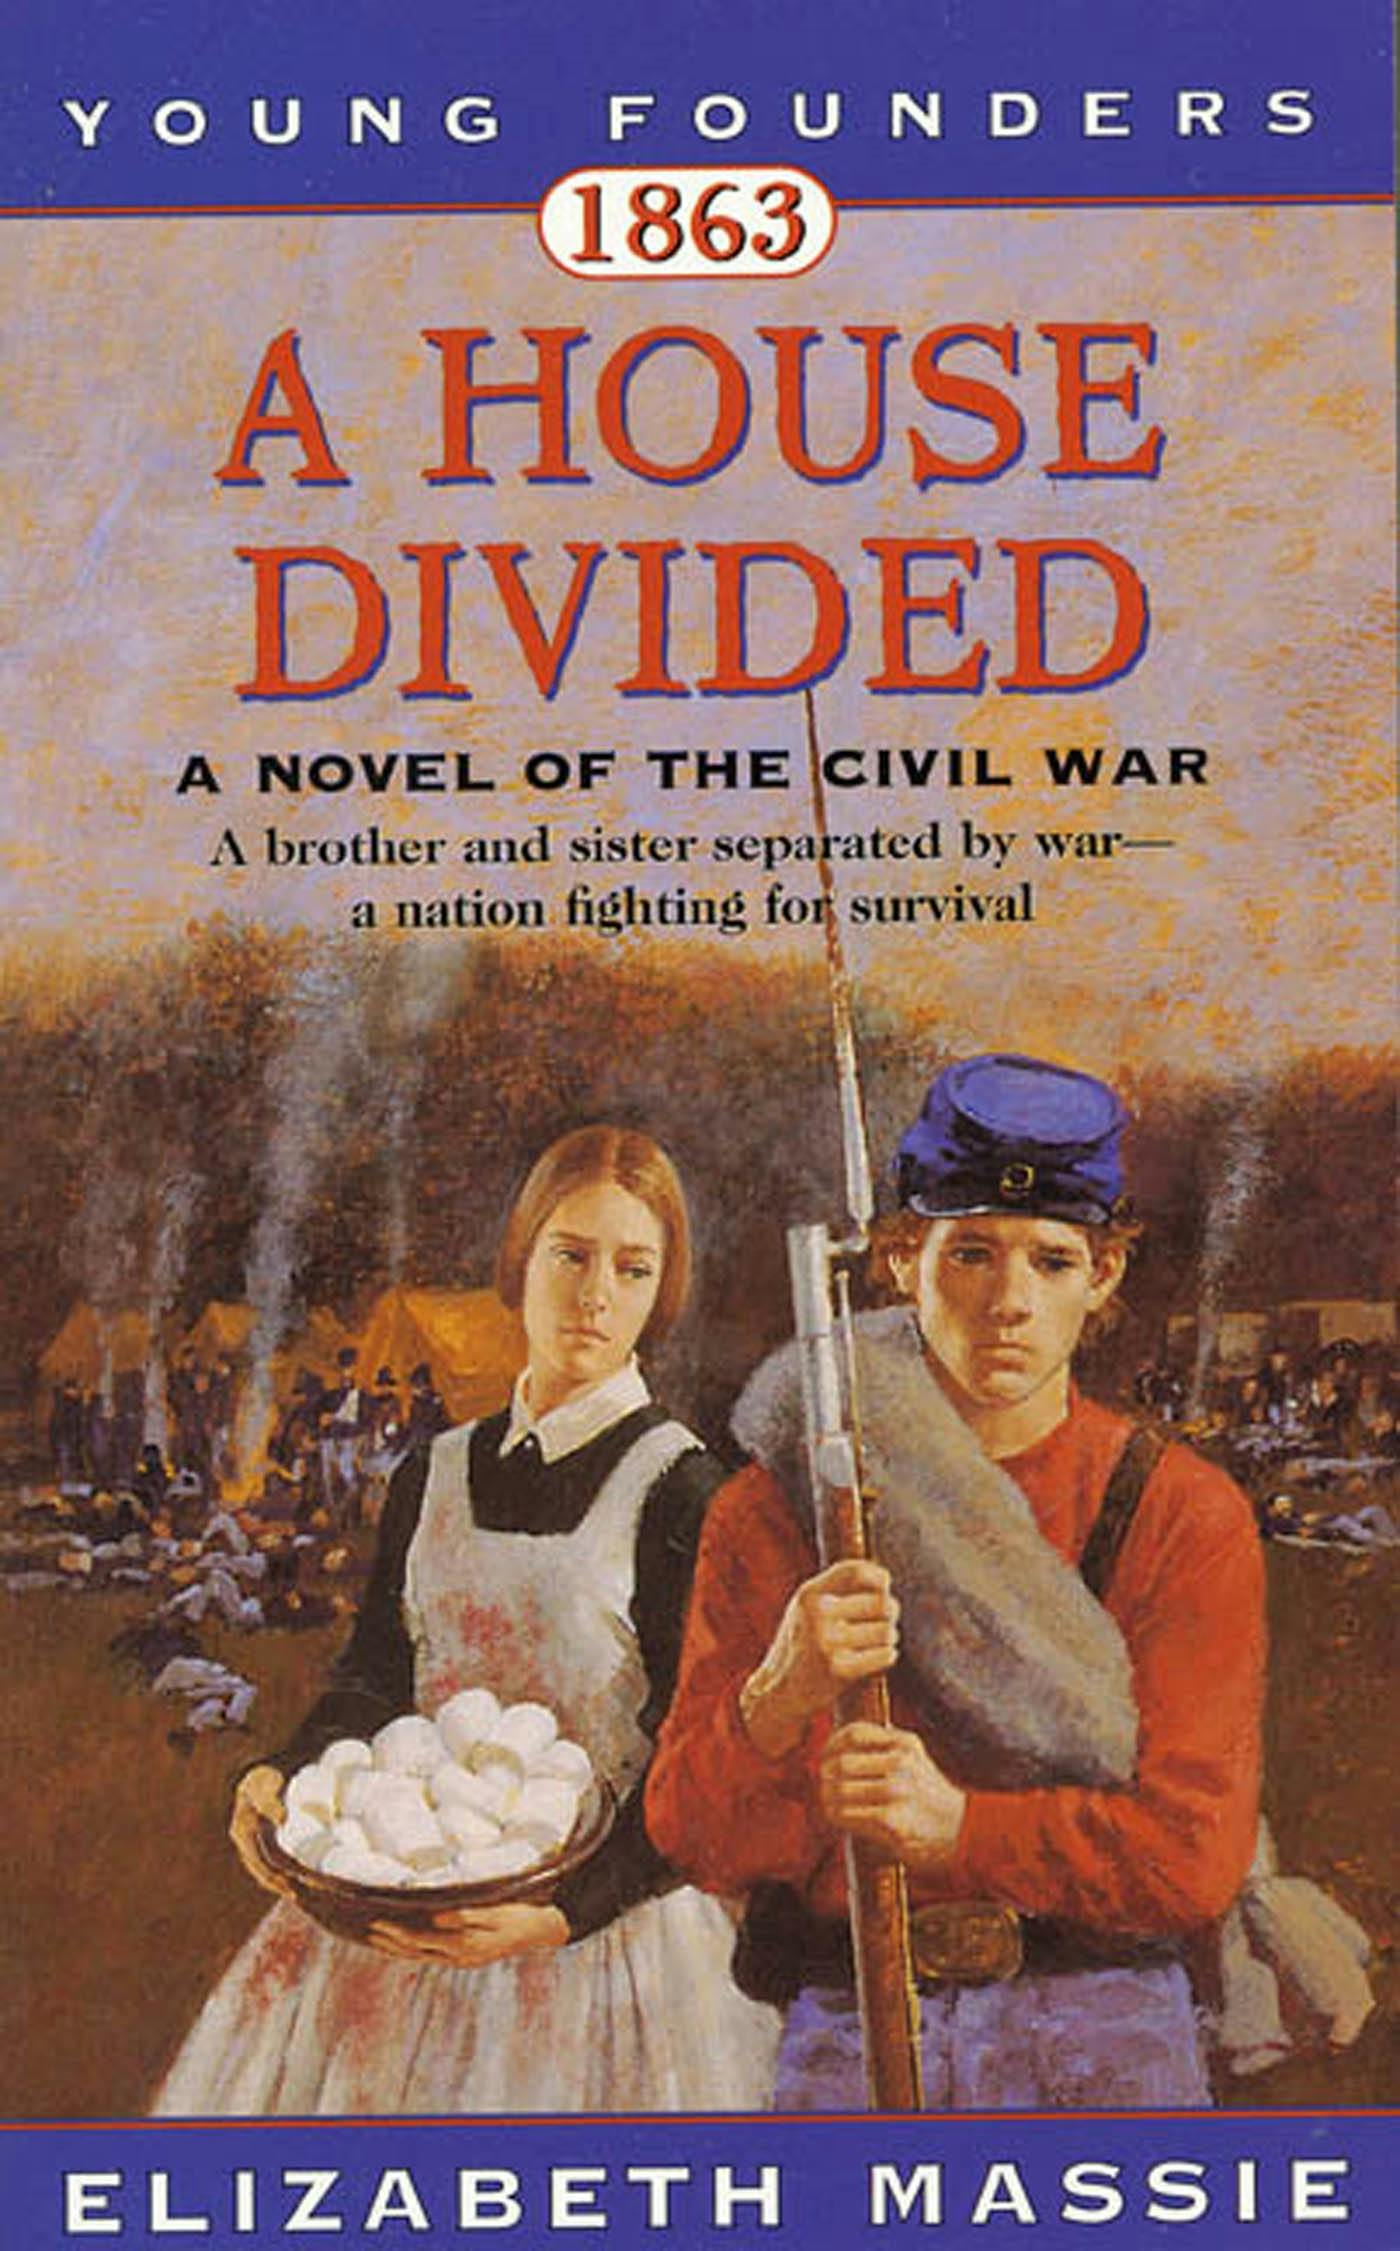 1863: A House Divided